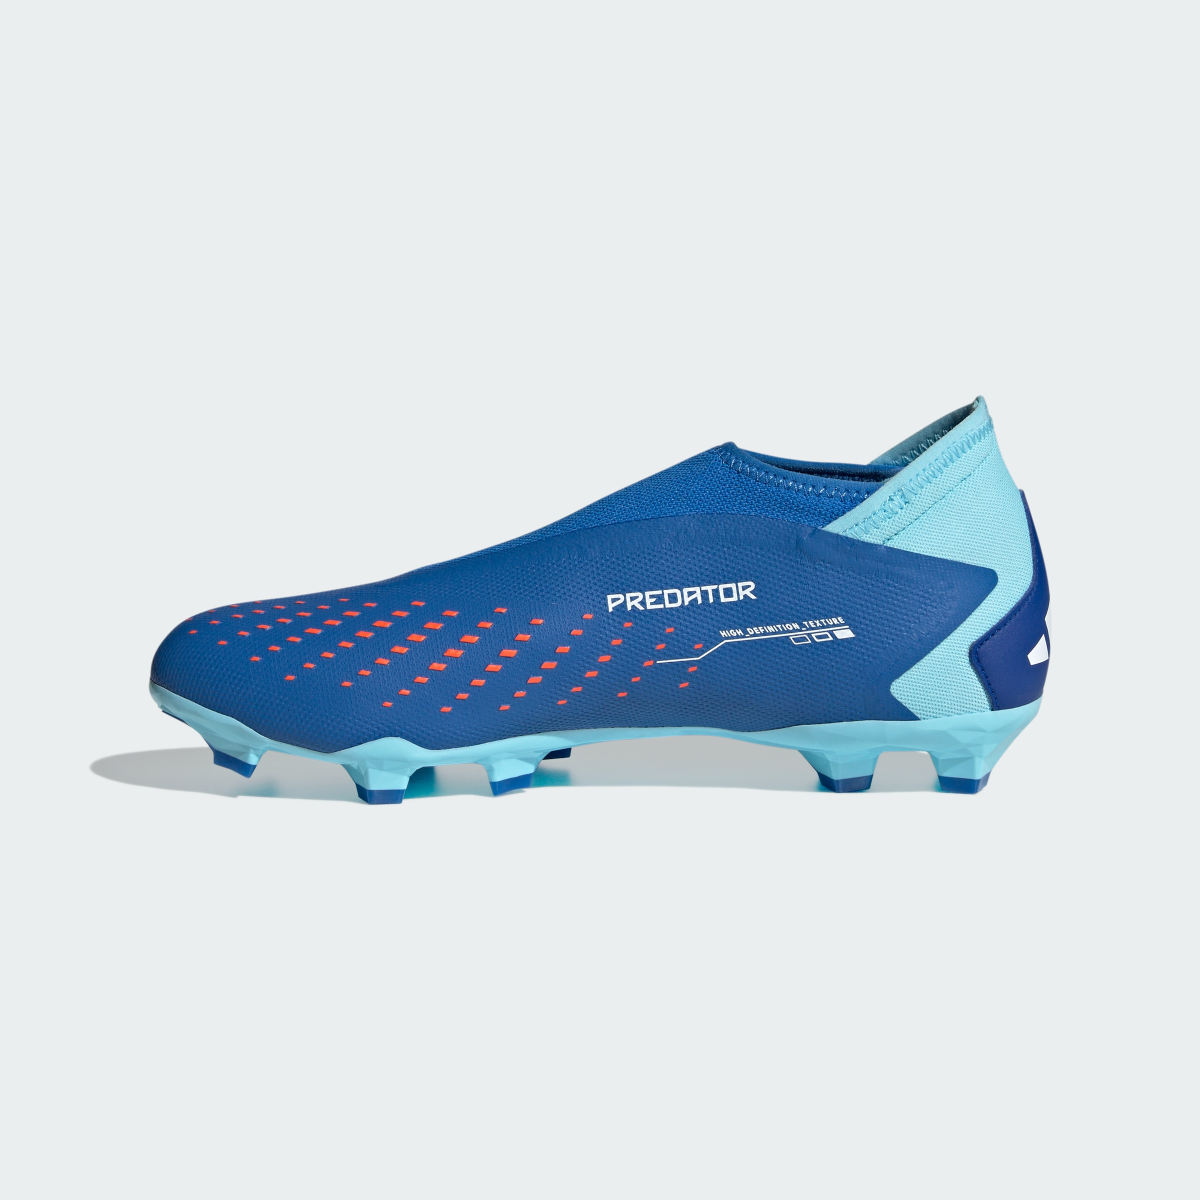 Adidas Predator Accuracy.3 Laceless Firm Ground Boots. 7